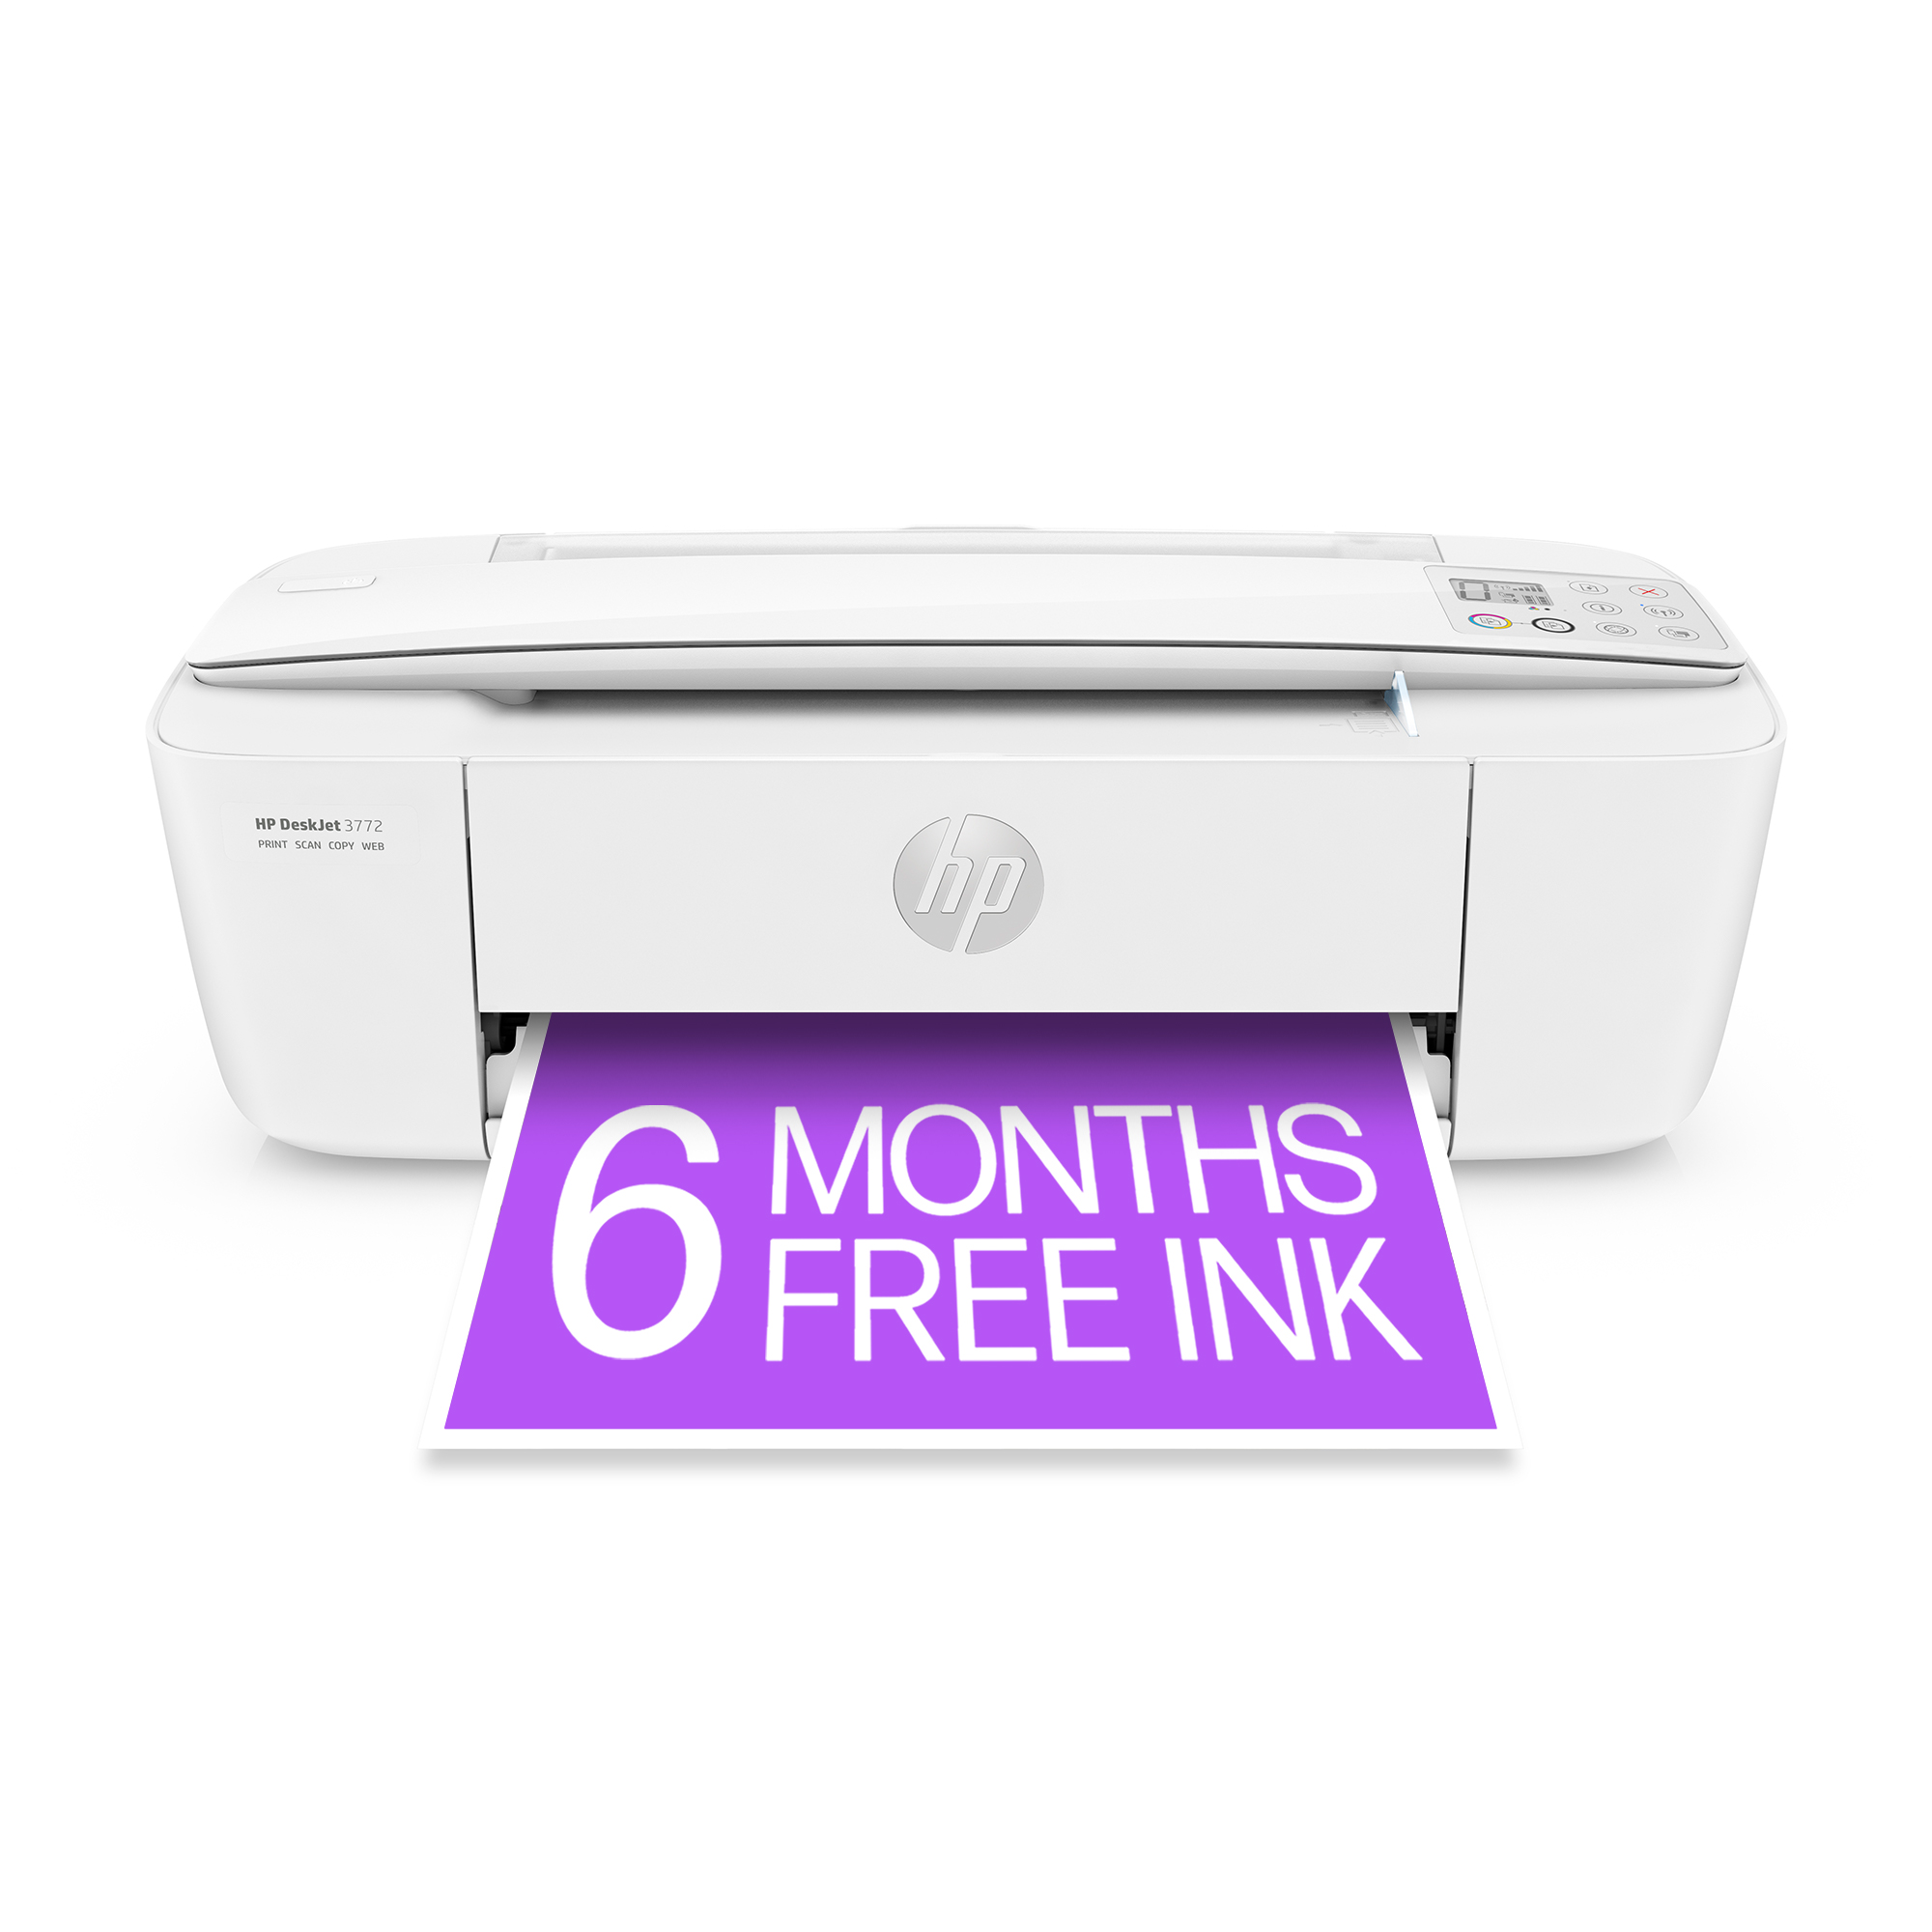 HP DeskJet 3772 All-in-One Wireless Color Inkjet Printer, 6 Months FREE ink  with HP Instant Ink 